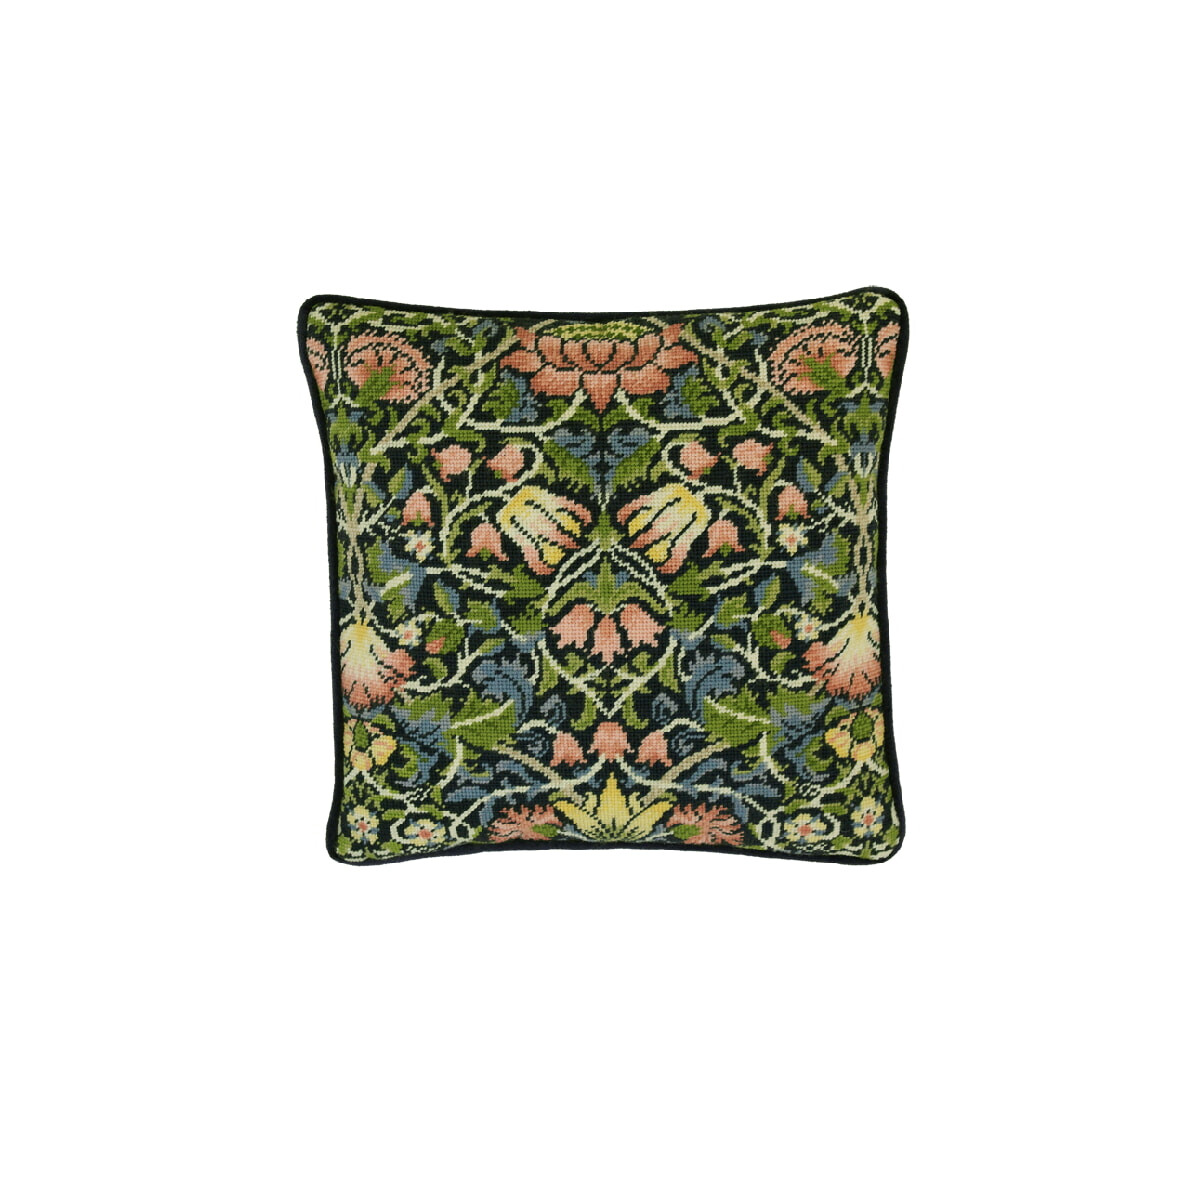 Square decorative cushion with an intricate floral...